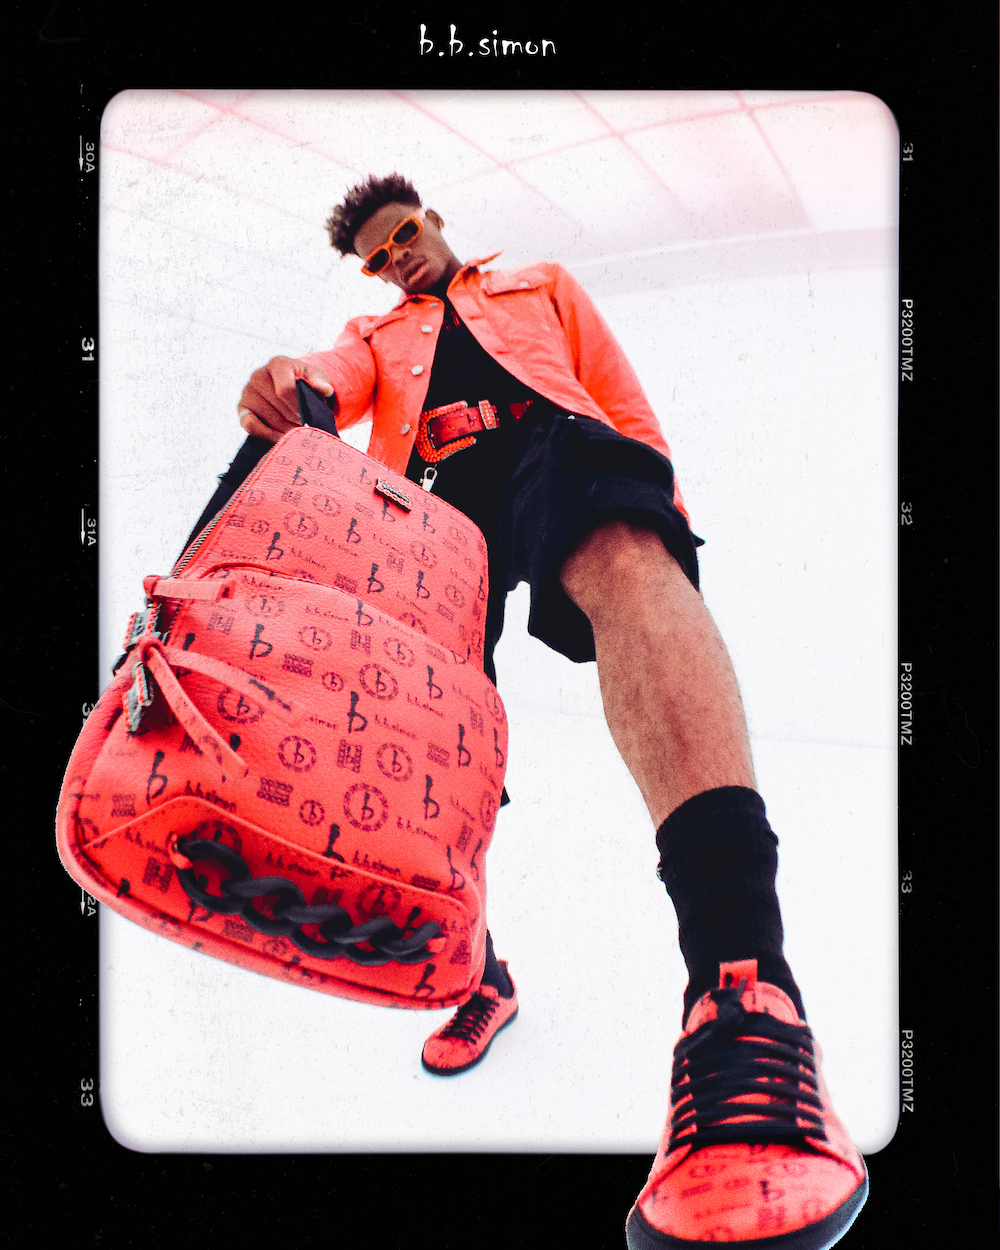 A Model wears red B.B. Simon pieces and presents a new backpack designed by the bnrand.